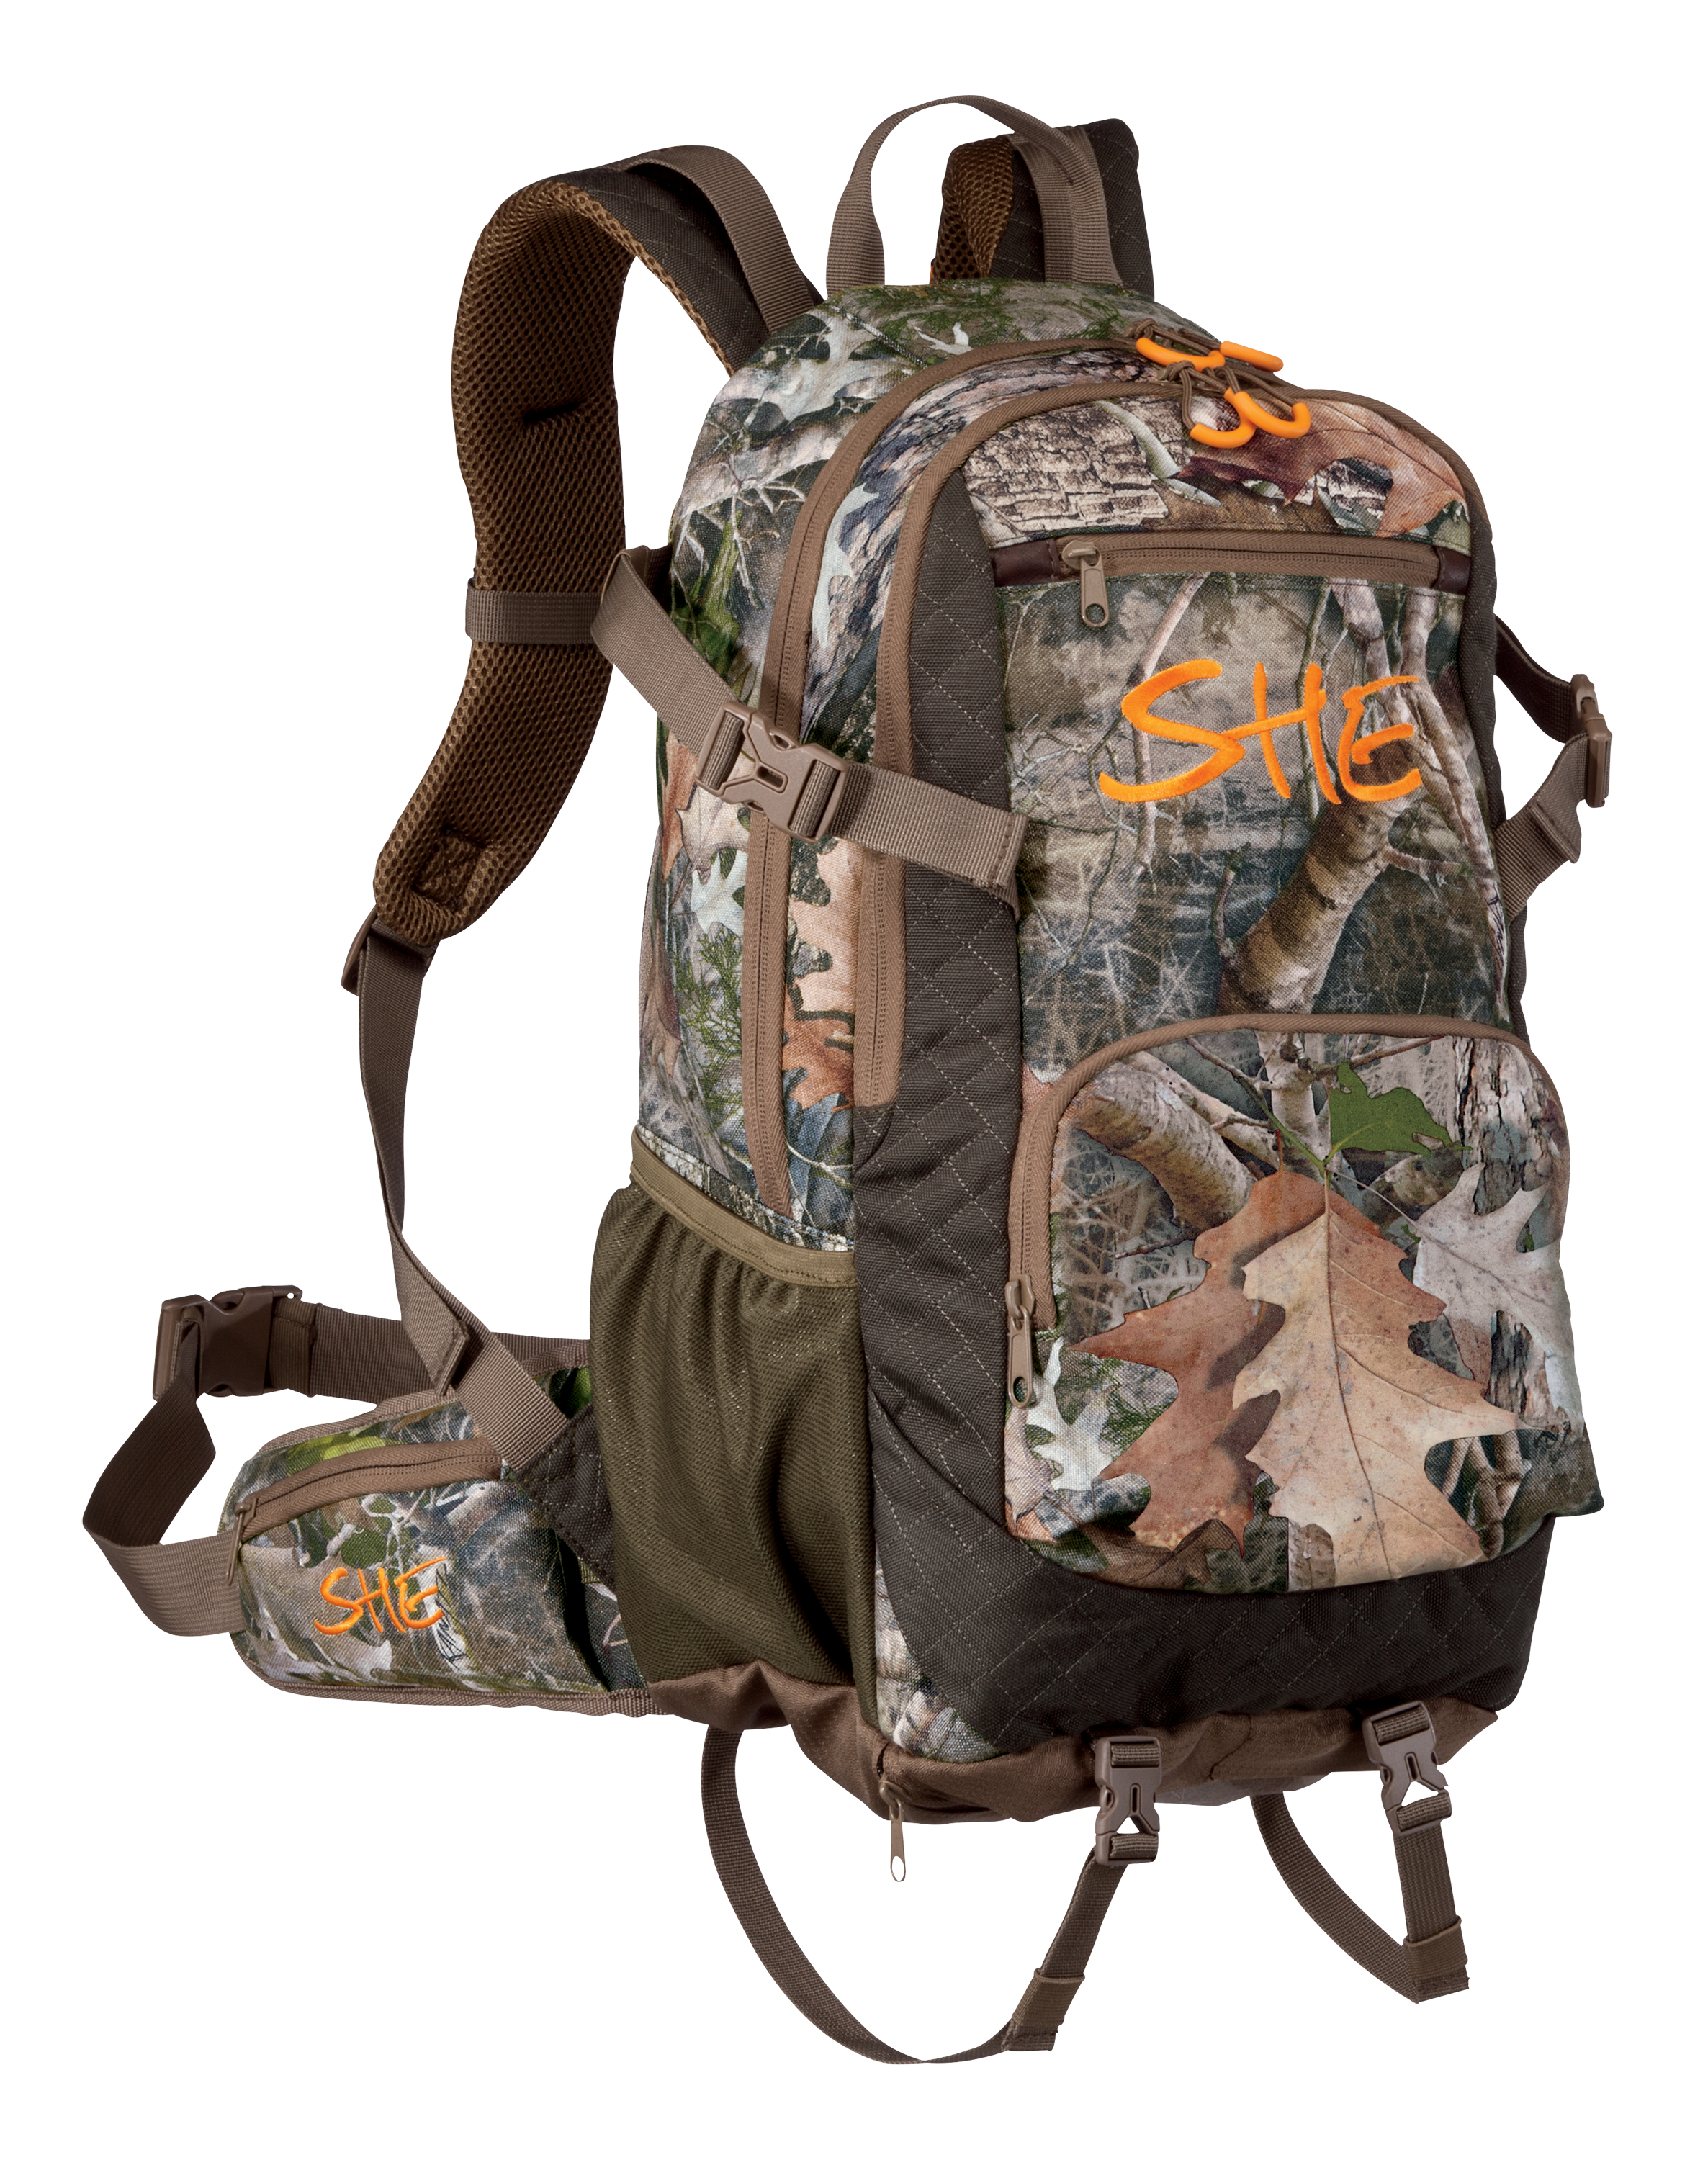 Fishing Tackle Backpack Bag with 4 Fishing Tackle Boxes Water-Resistant Fly Fishing  Pack Outdoor Sports Camg Hiking Backpack Camouflage -Layfoo : :  Bags, Wallets and Luggage